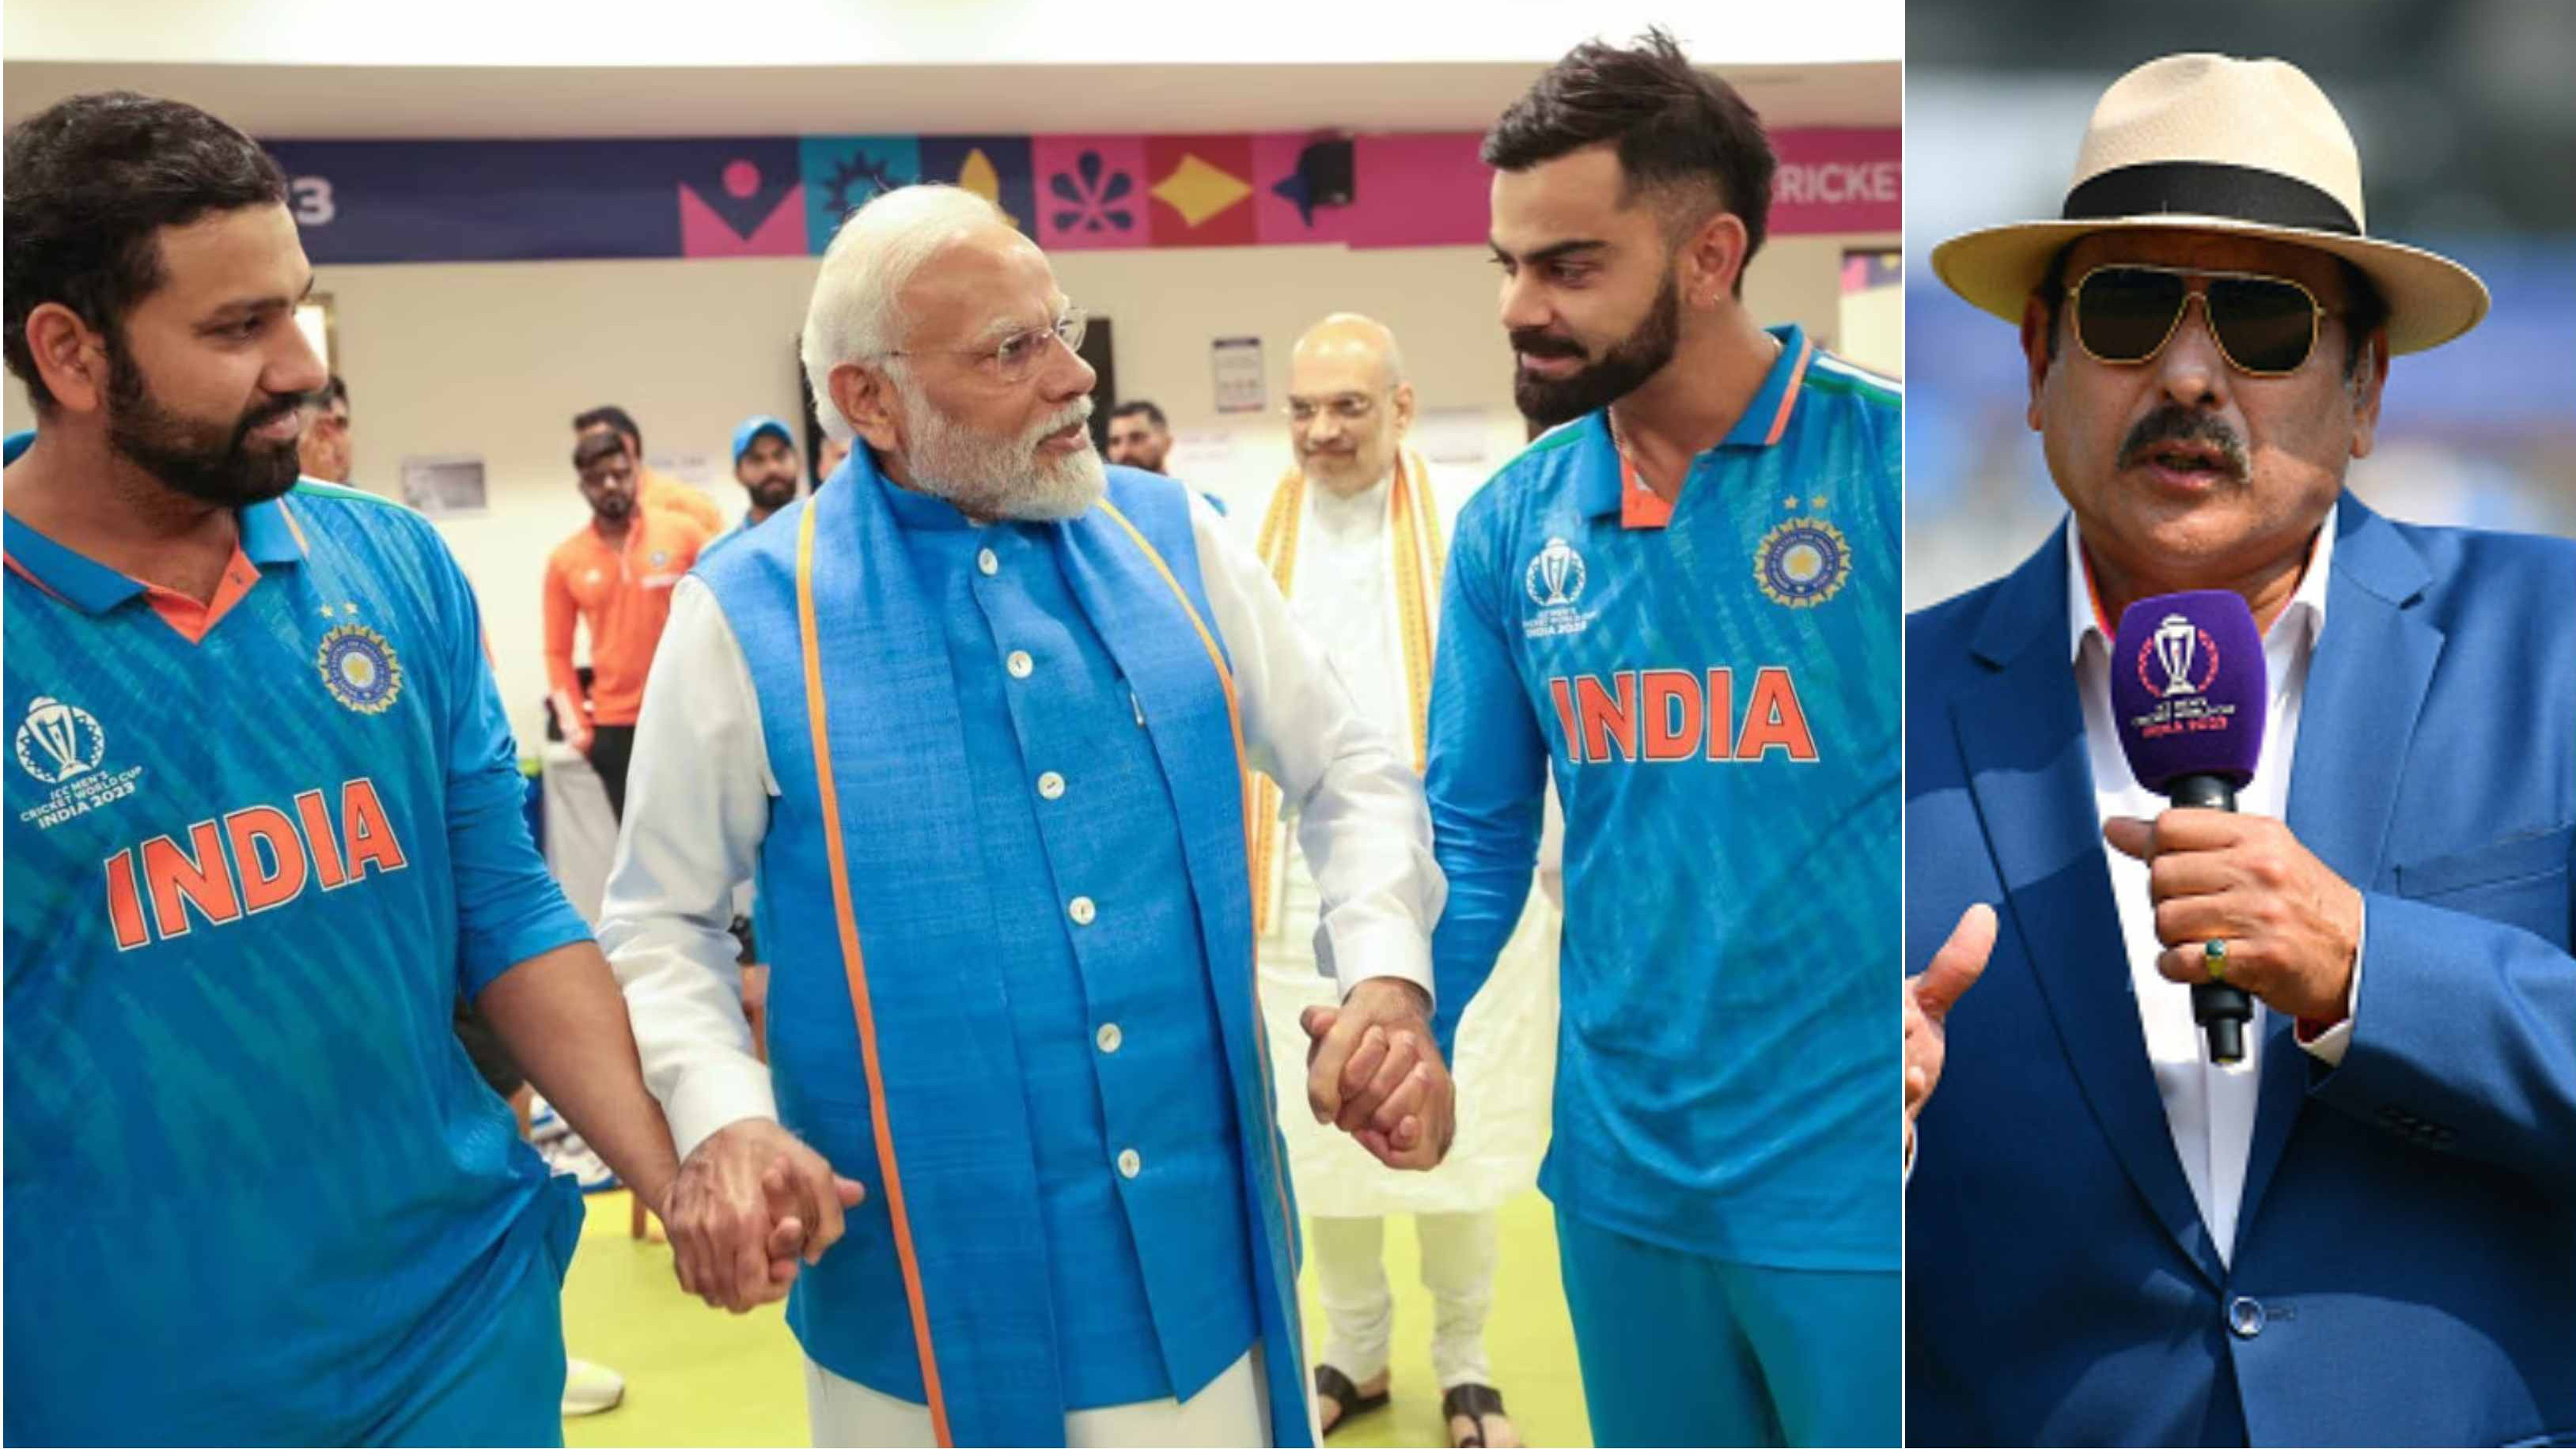 “It can lift the spirits of players”: Ravi Shastri on PM Modi visiting Indian dressing room after World Cup final loss